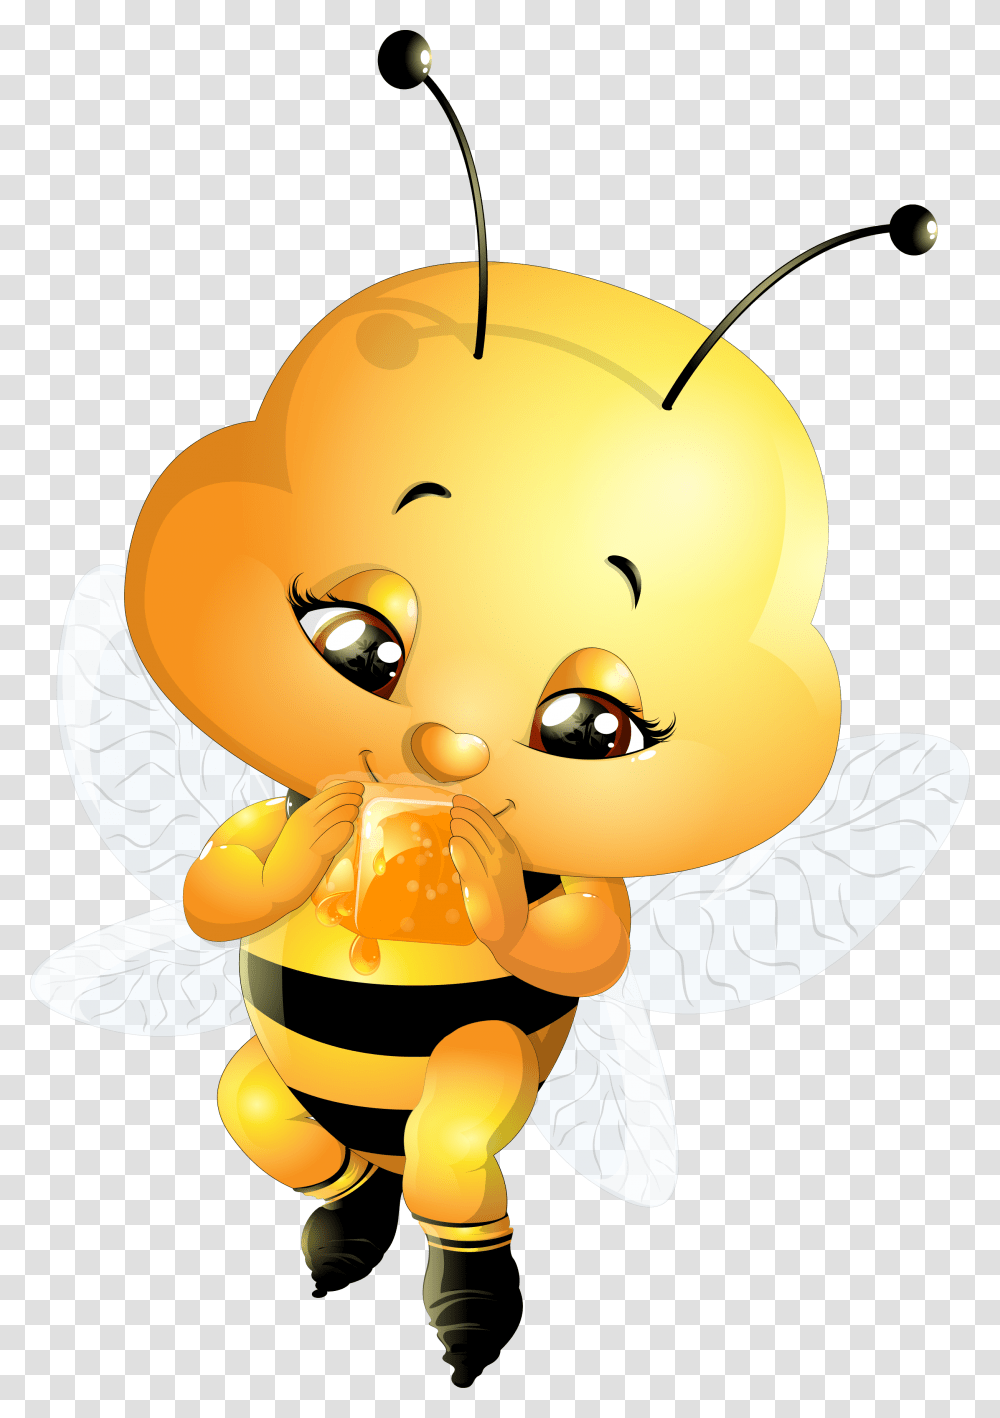 Insect Hornet Apidae Honey Bee Icons Honey Baby, Animal, Toy, Invertebrate, Outdoors Transparent Png